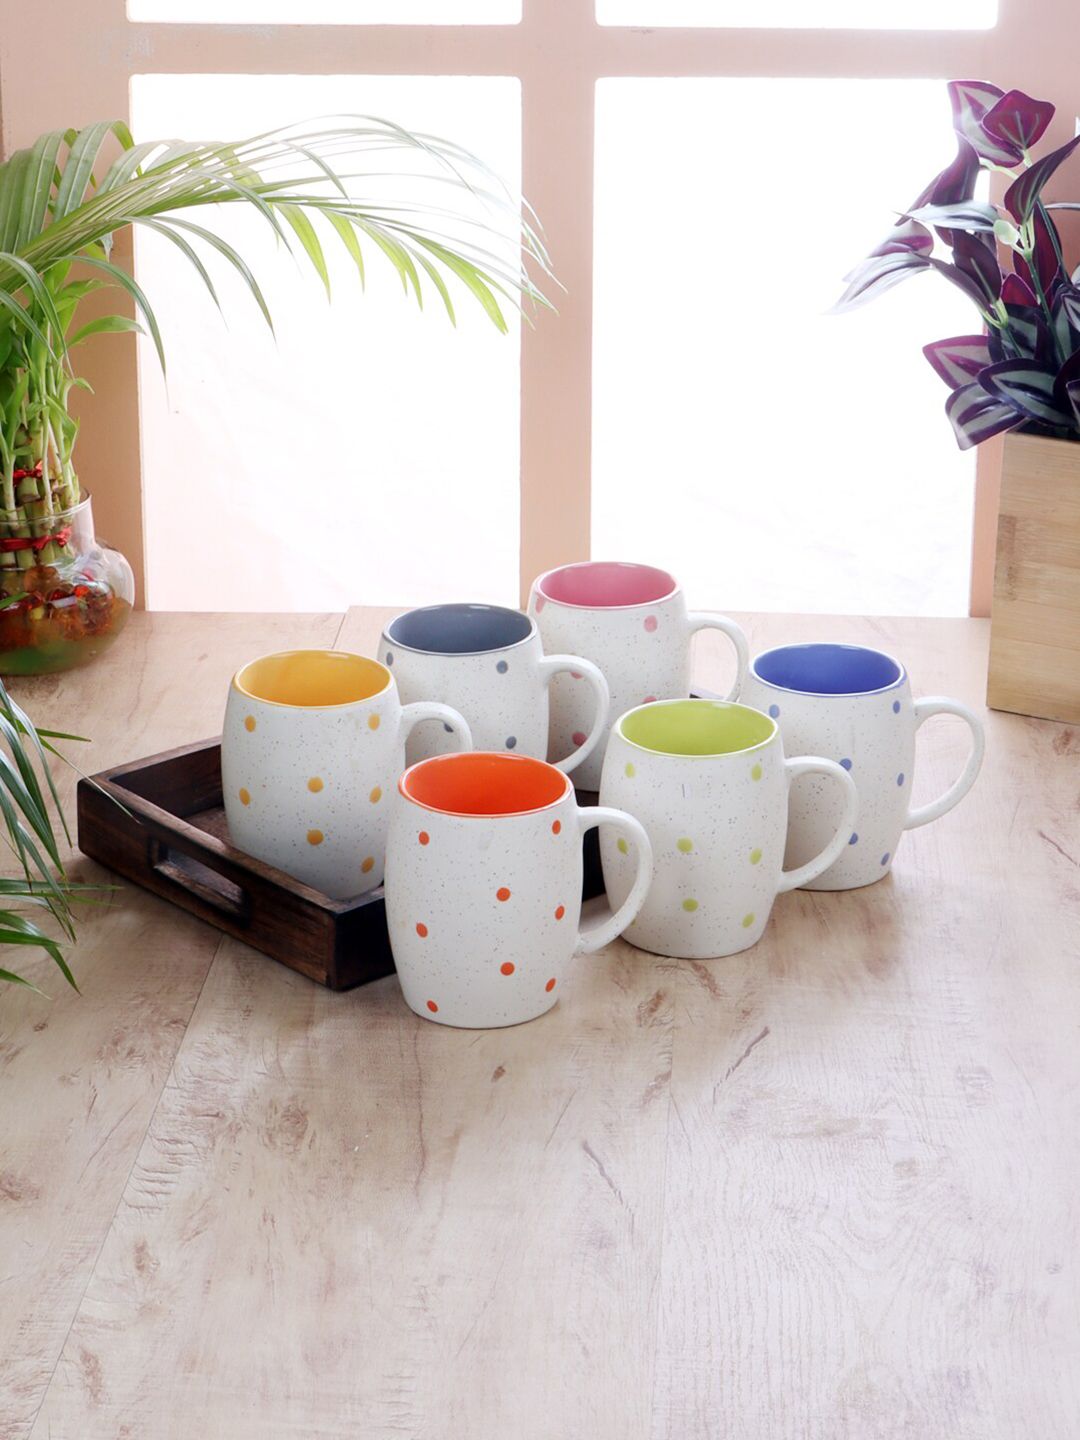 CDI Multicoloured Set of 6 Printed Ceramic Glossy Mugs with Wooden Tray Price in India